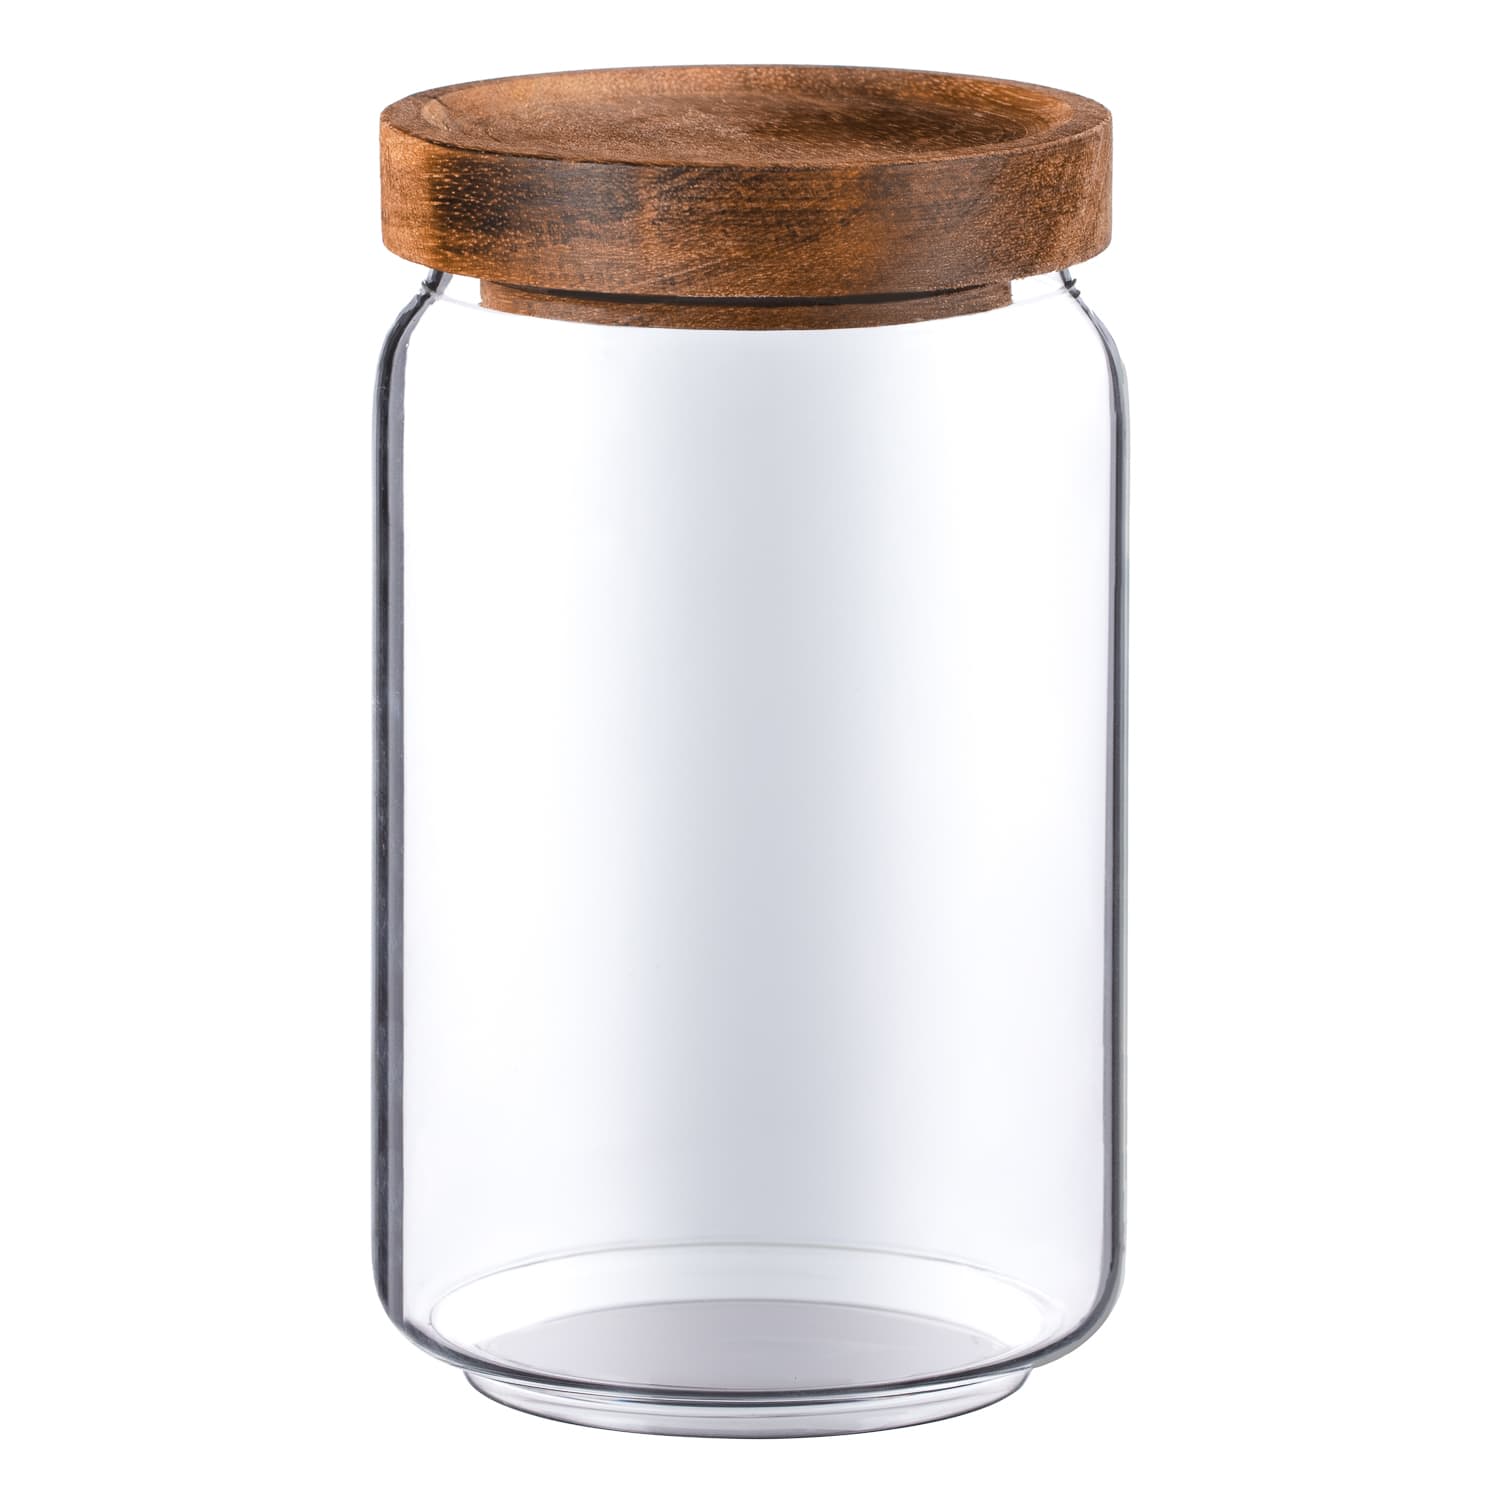 https://www.bmstores.co.uk/images/hpcProductImage/imgSource/380516-airtight-glass-jar-small.jpg